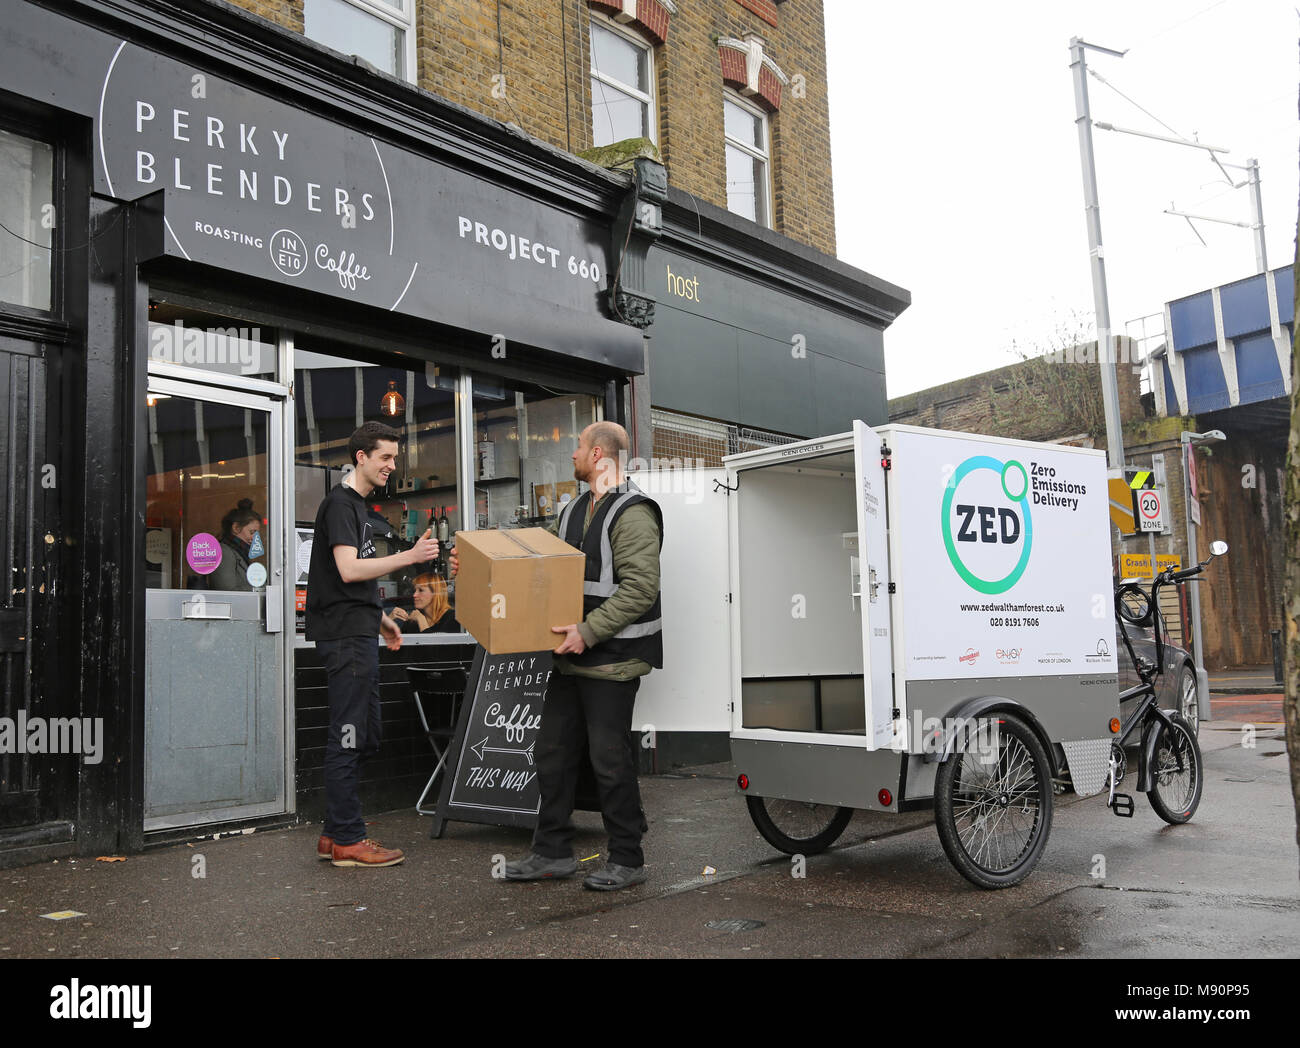 Staff from a Zero Emissions delivery company use an electric cargo trike to distribute goods in Walthamstow, North London. Stock Photo